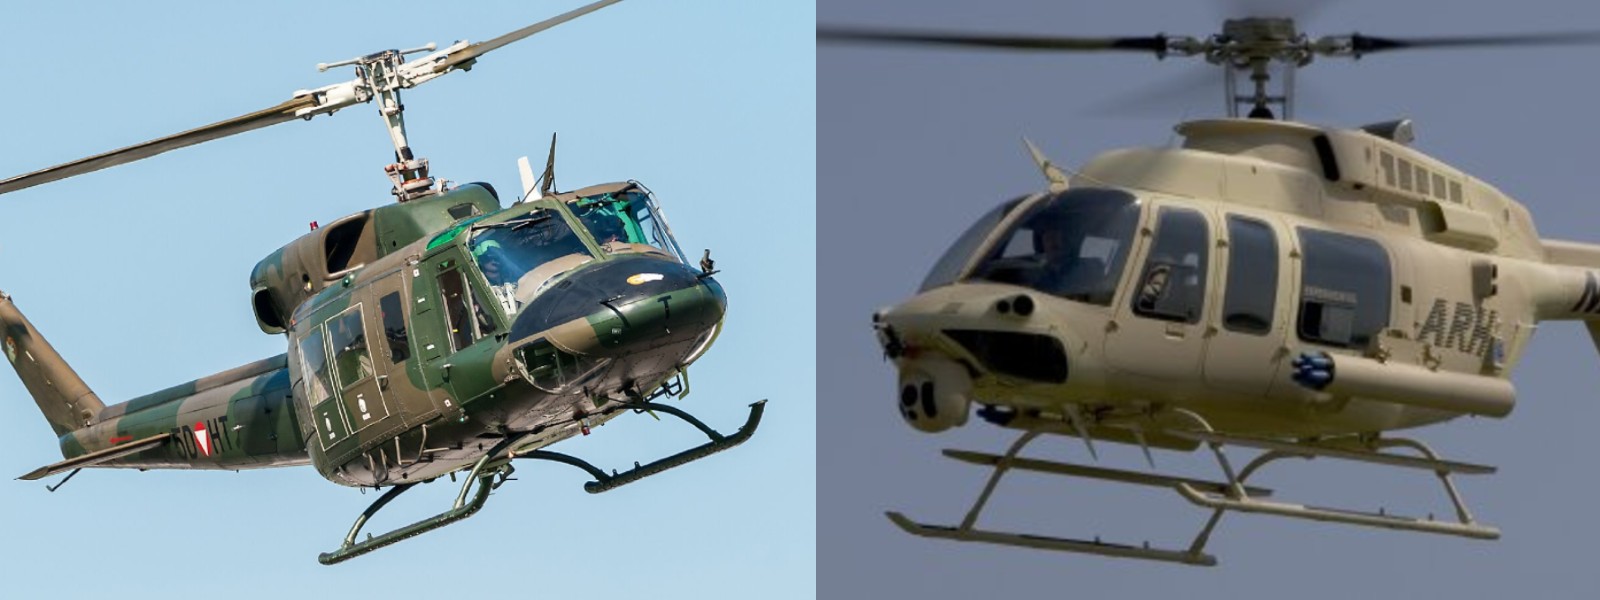 Green light given to purchase 04 used helicopters for SLAF Training